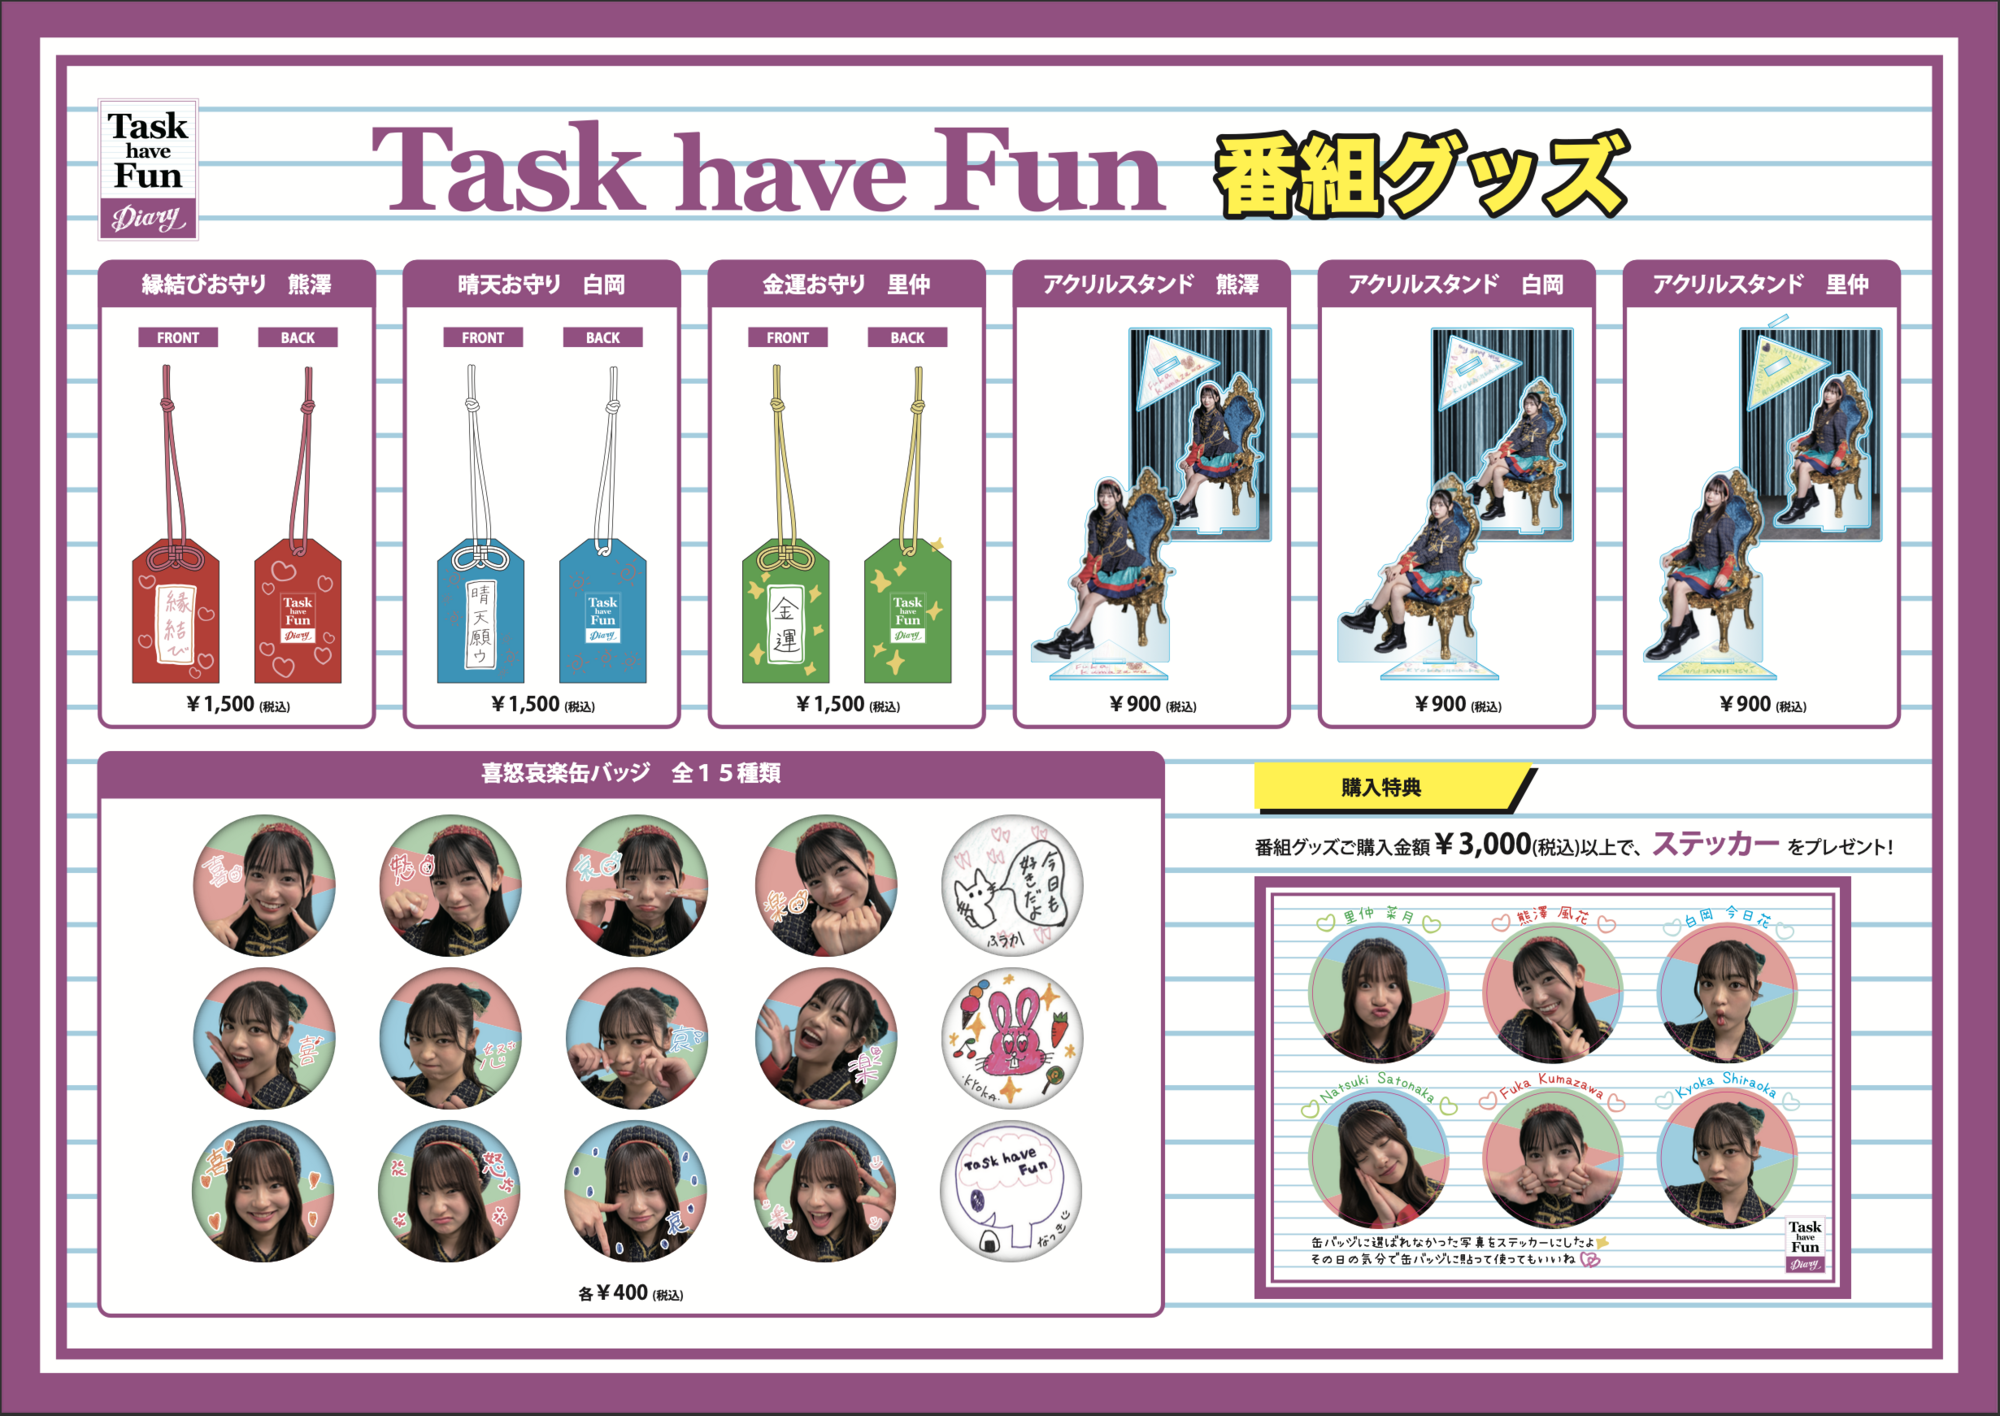 Task have Fun 番組グッズ』販売決定！ | Task have Fun Official Site